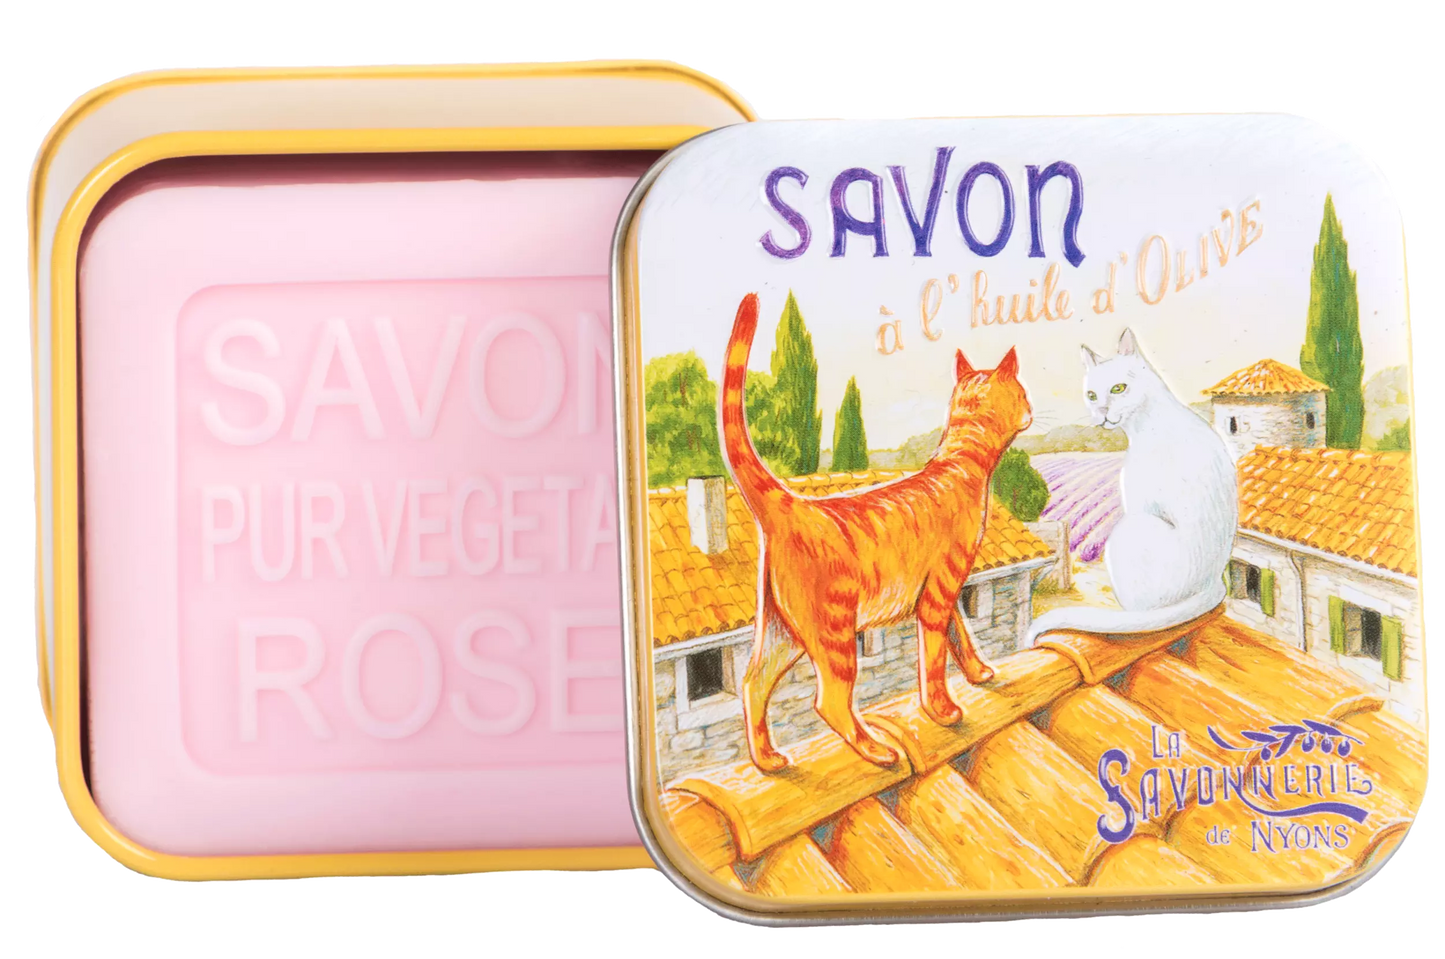 Soap 100g in a tin box "CHATS 2 Sur toit" - Rose